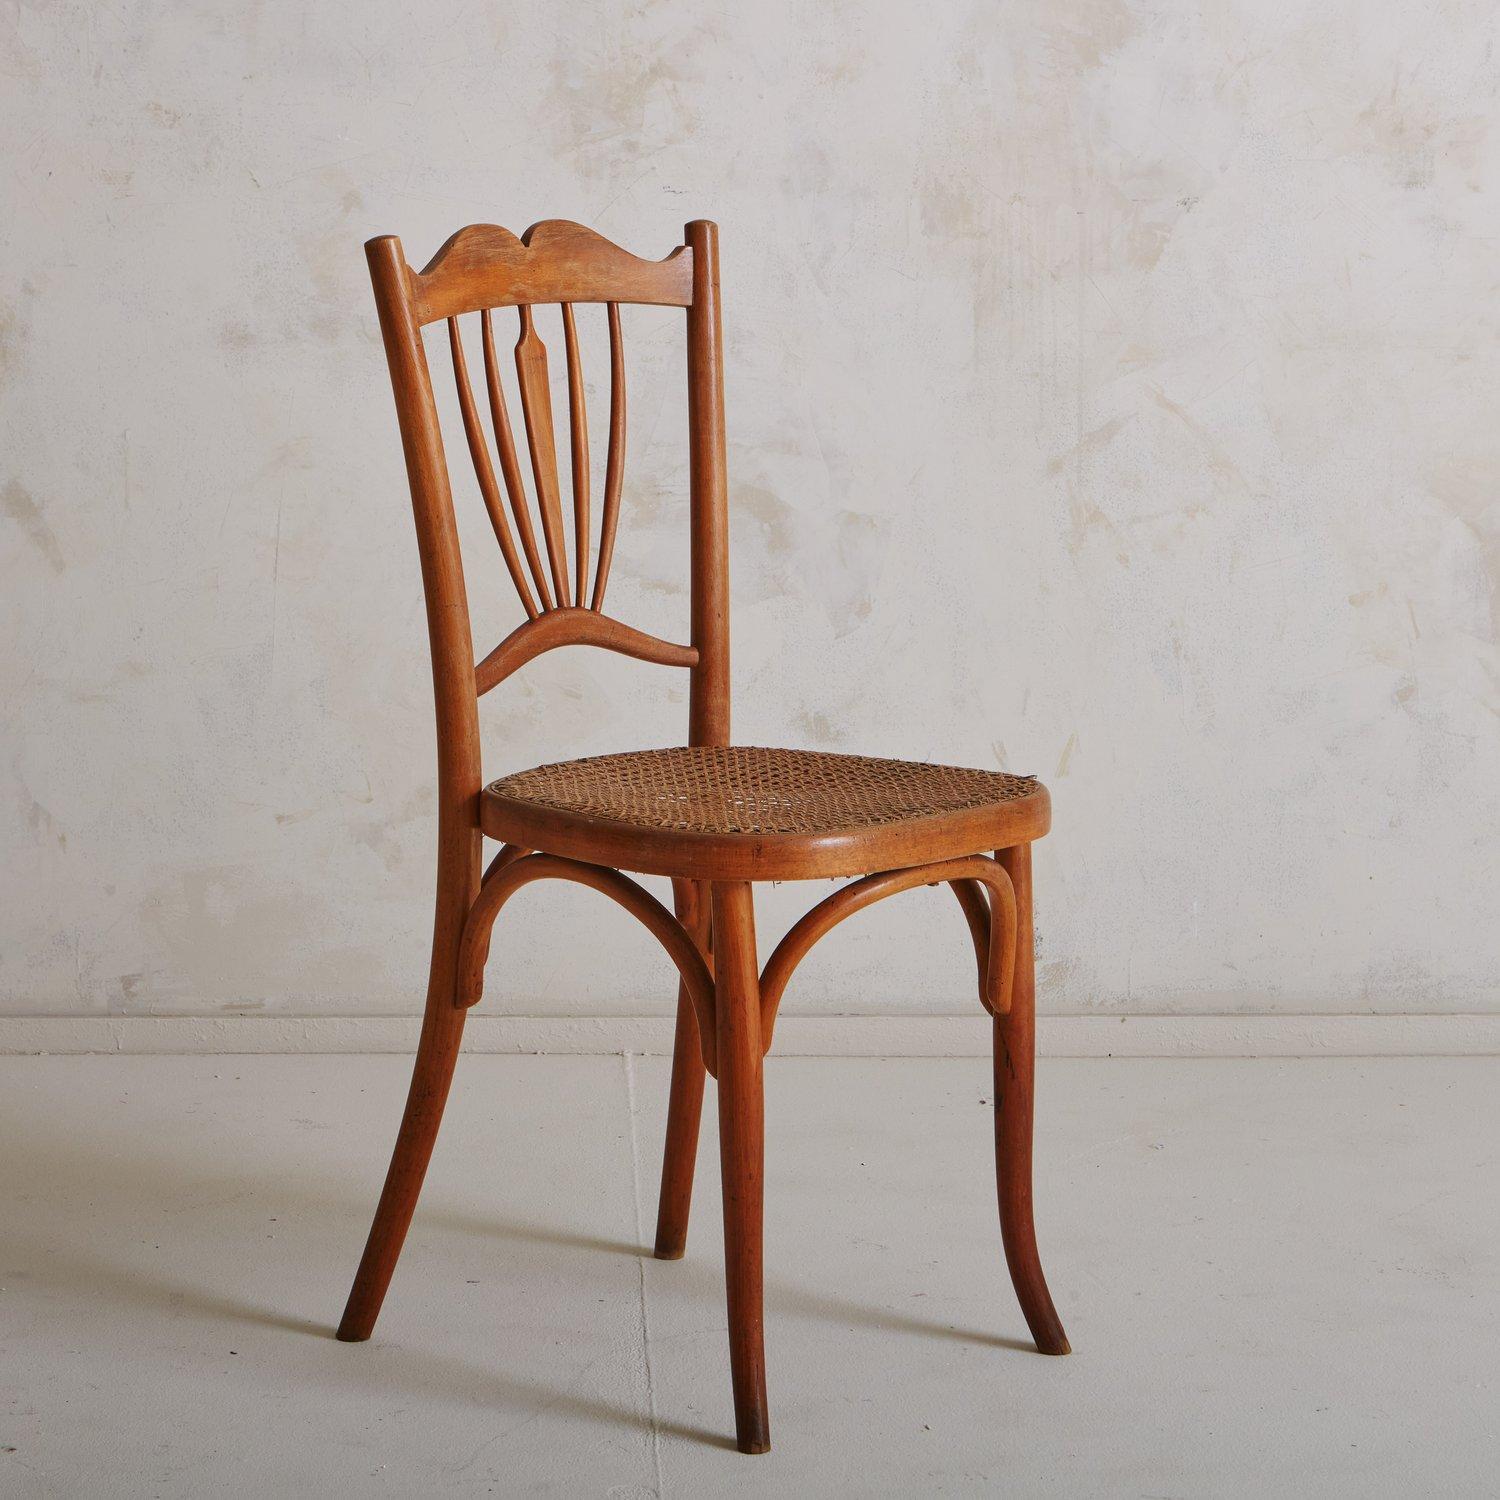 A vintage chair attributed to Fischel featuring a carved wooden frame, intricate decorative seat back and cane seat. This piece is documented in the Fischel catalog No.150. Sourced in France, early 1900s.

